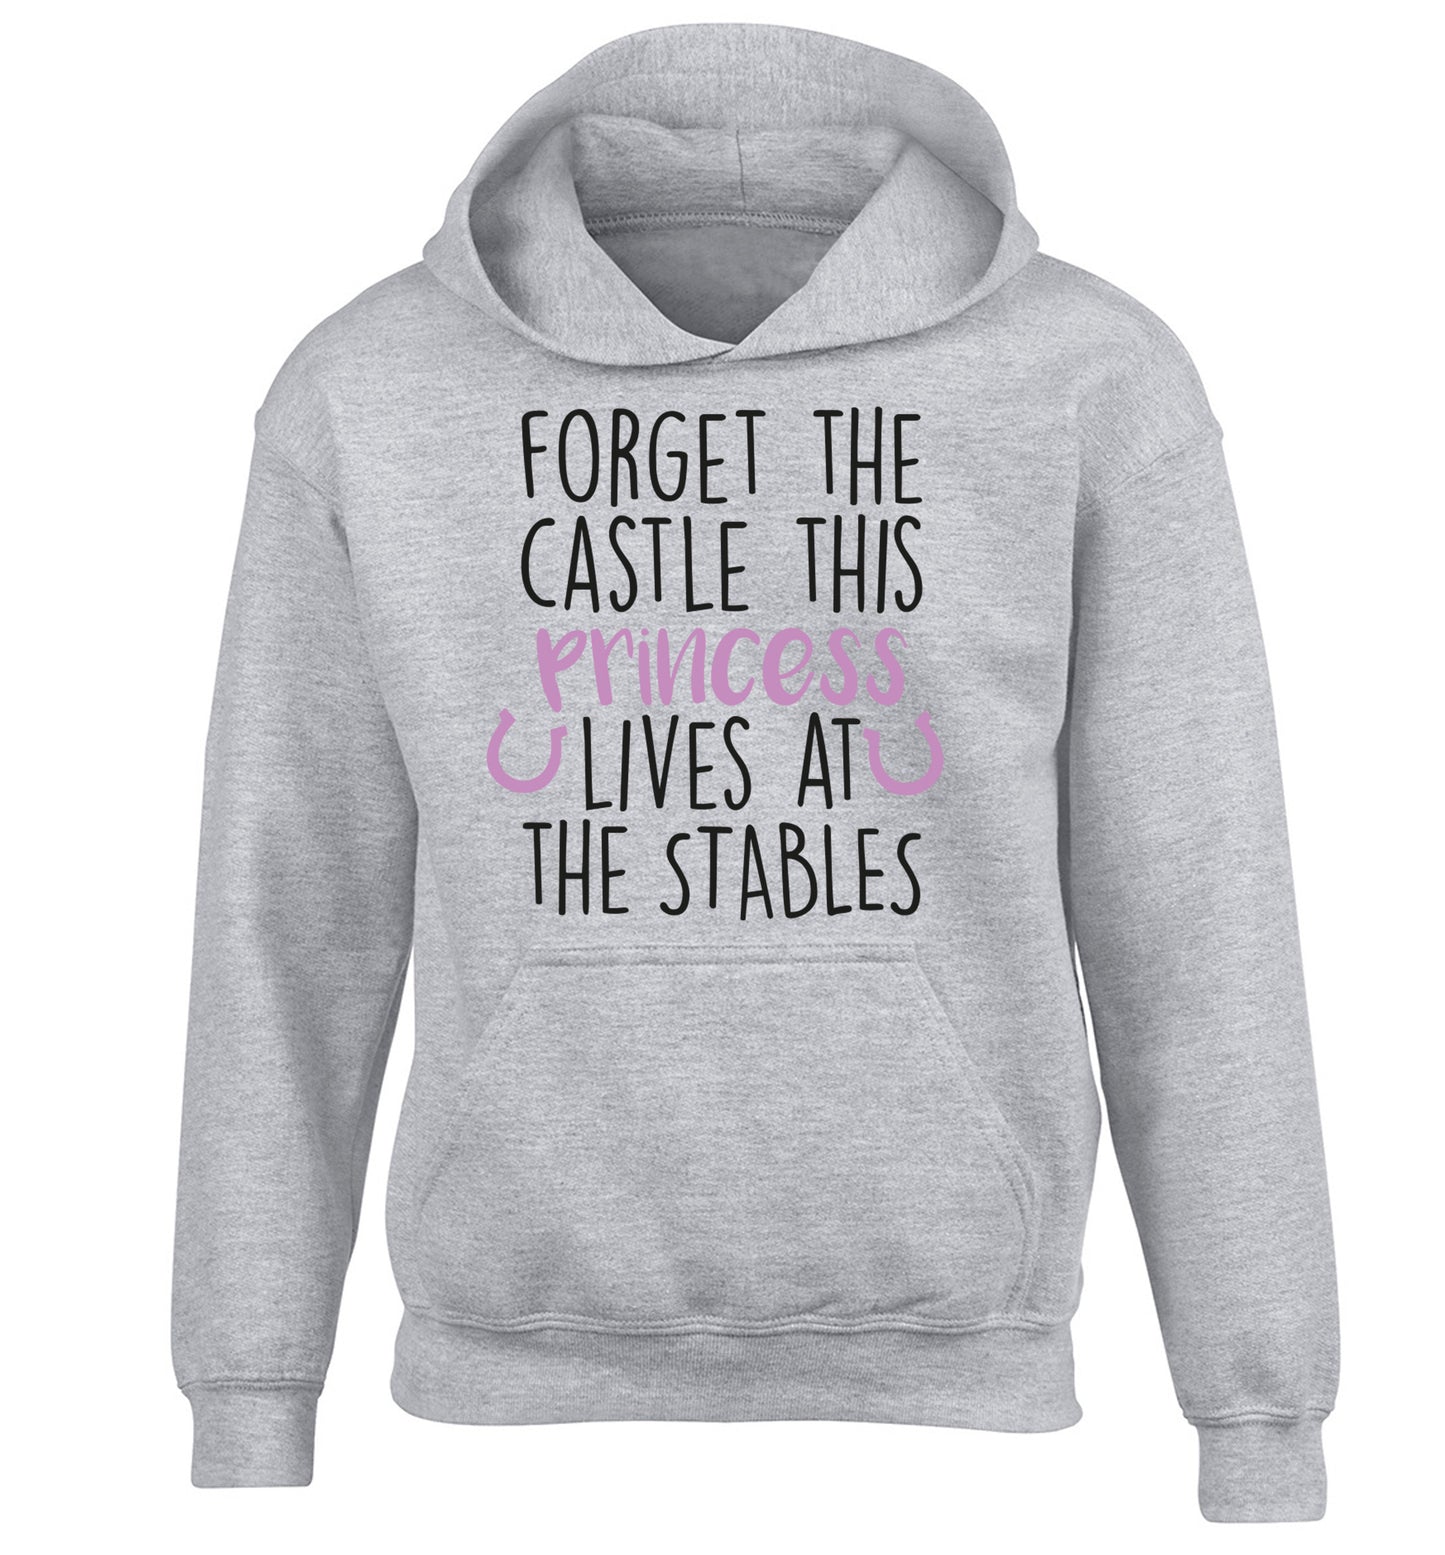 Forget the castle this princess lives at the stables children's grey hoodie 12-14 Years